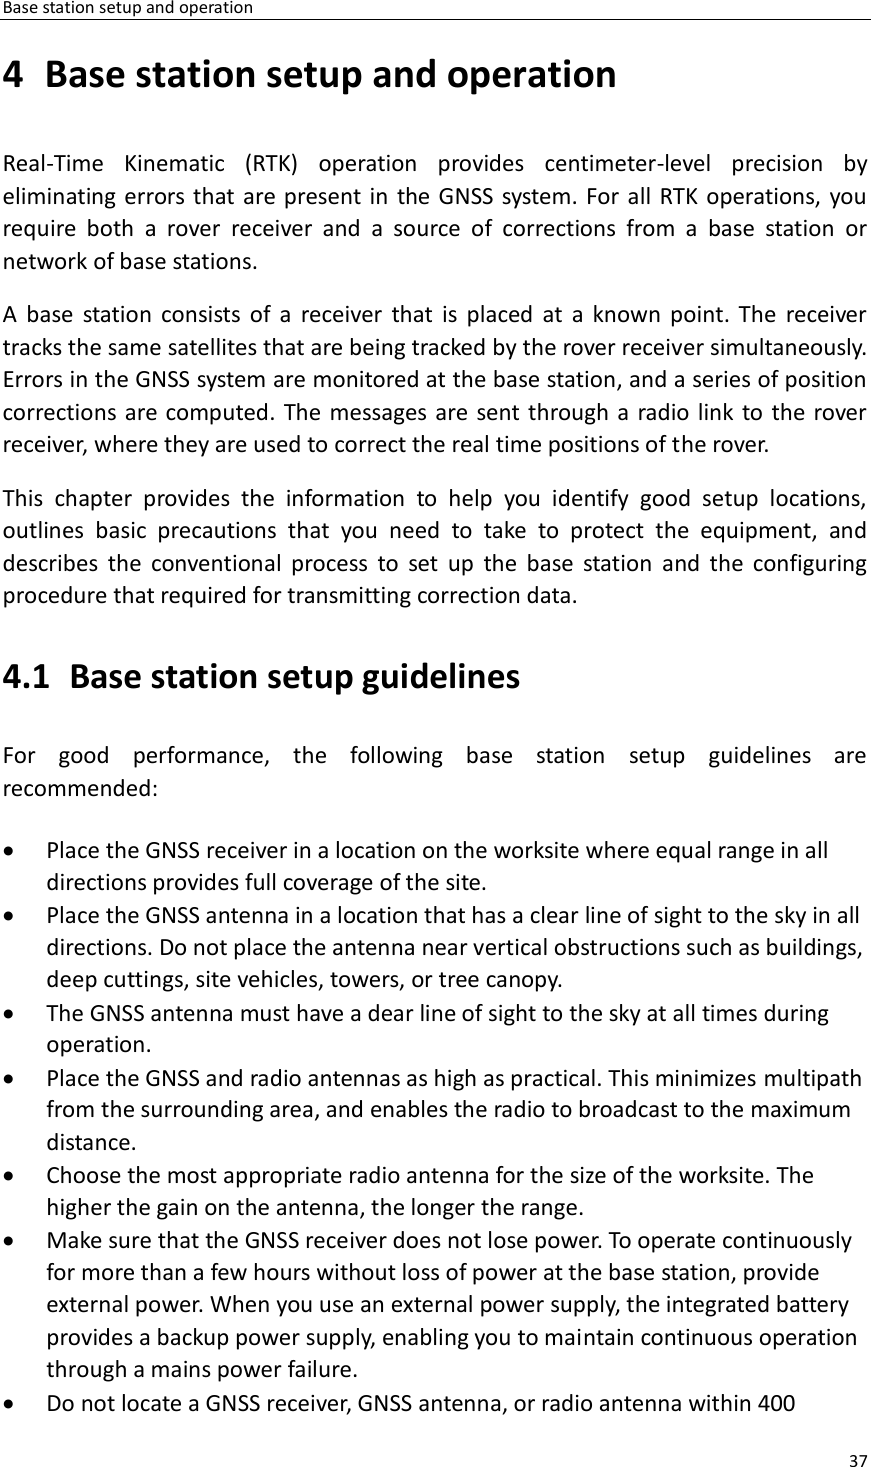 Page 37 of Huace Navigation Technology A01023 GNSS Receiver i70+ User Manual 